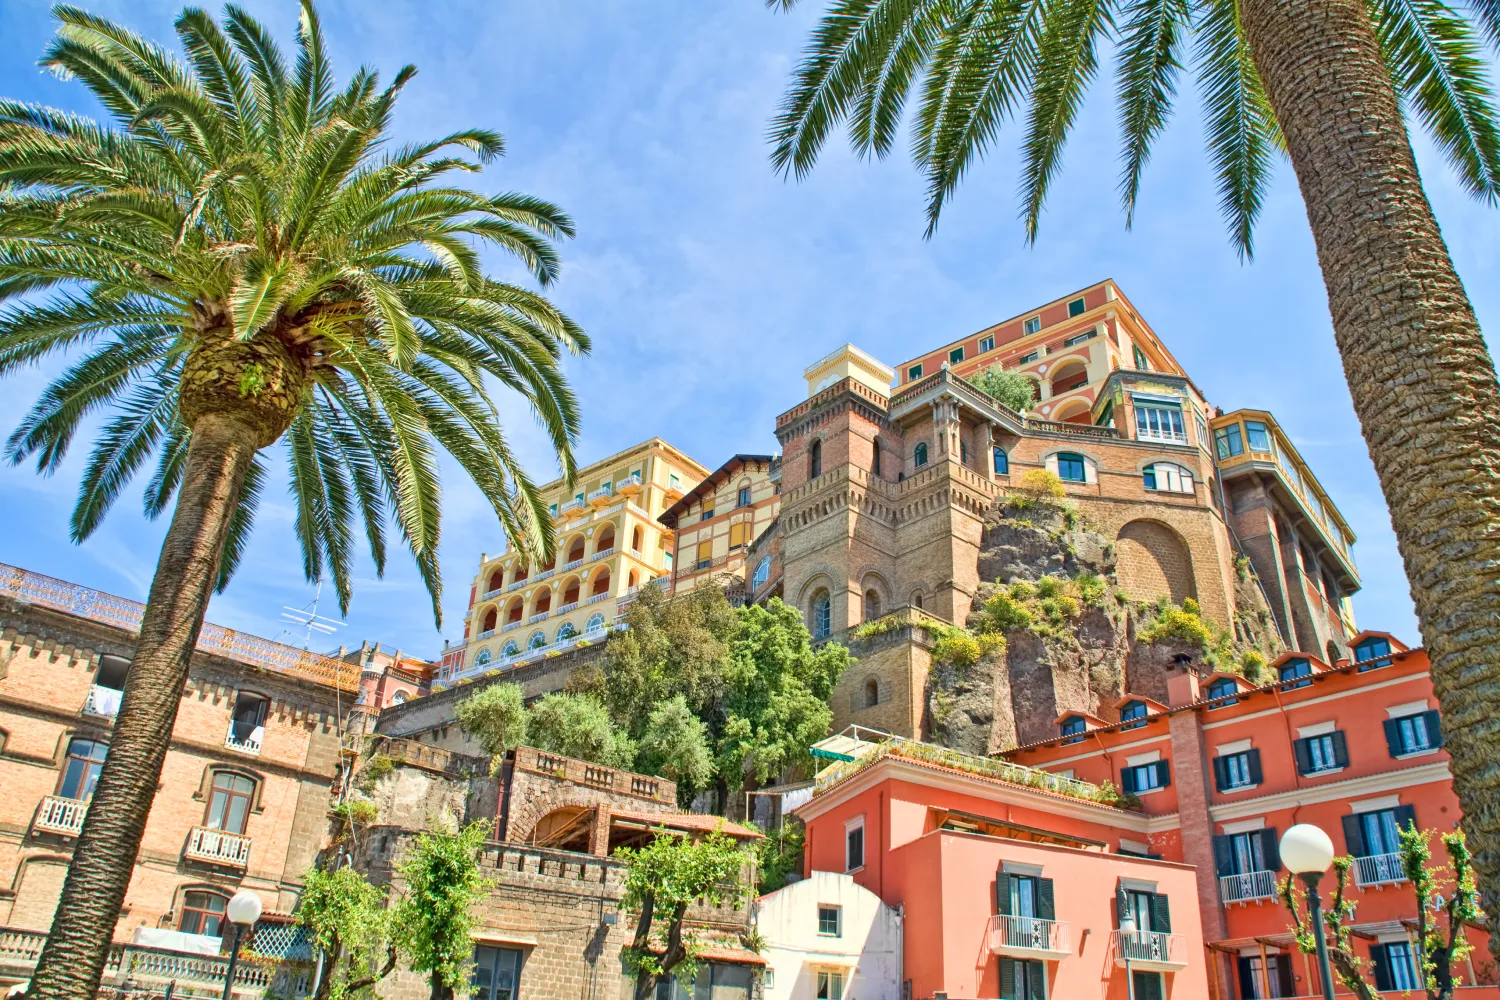 Palm trees and Historic Hotels in Sorrento